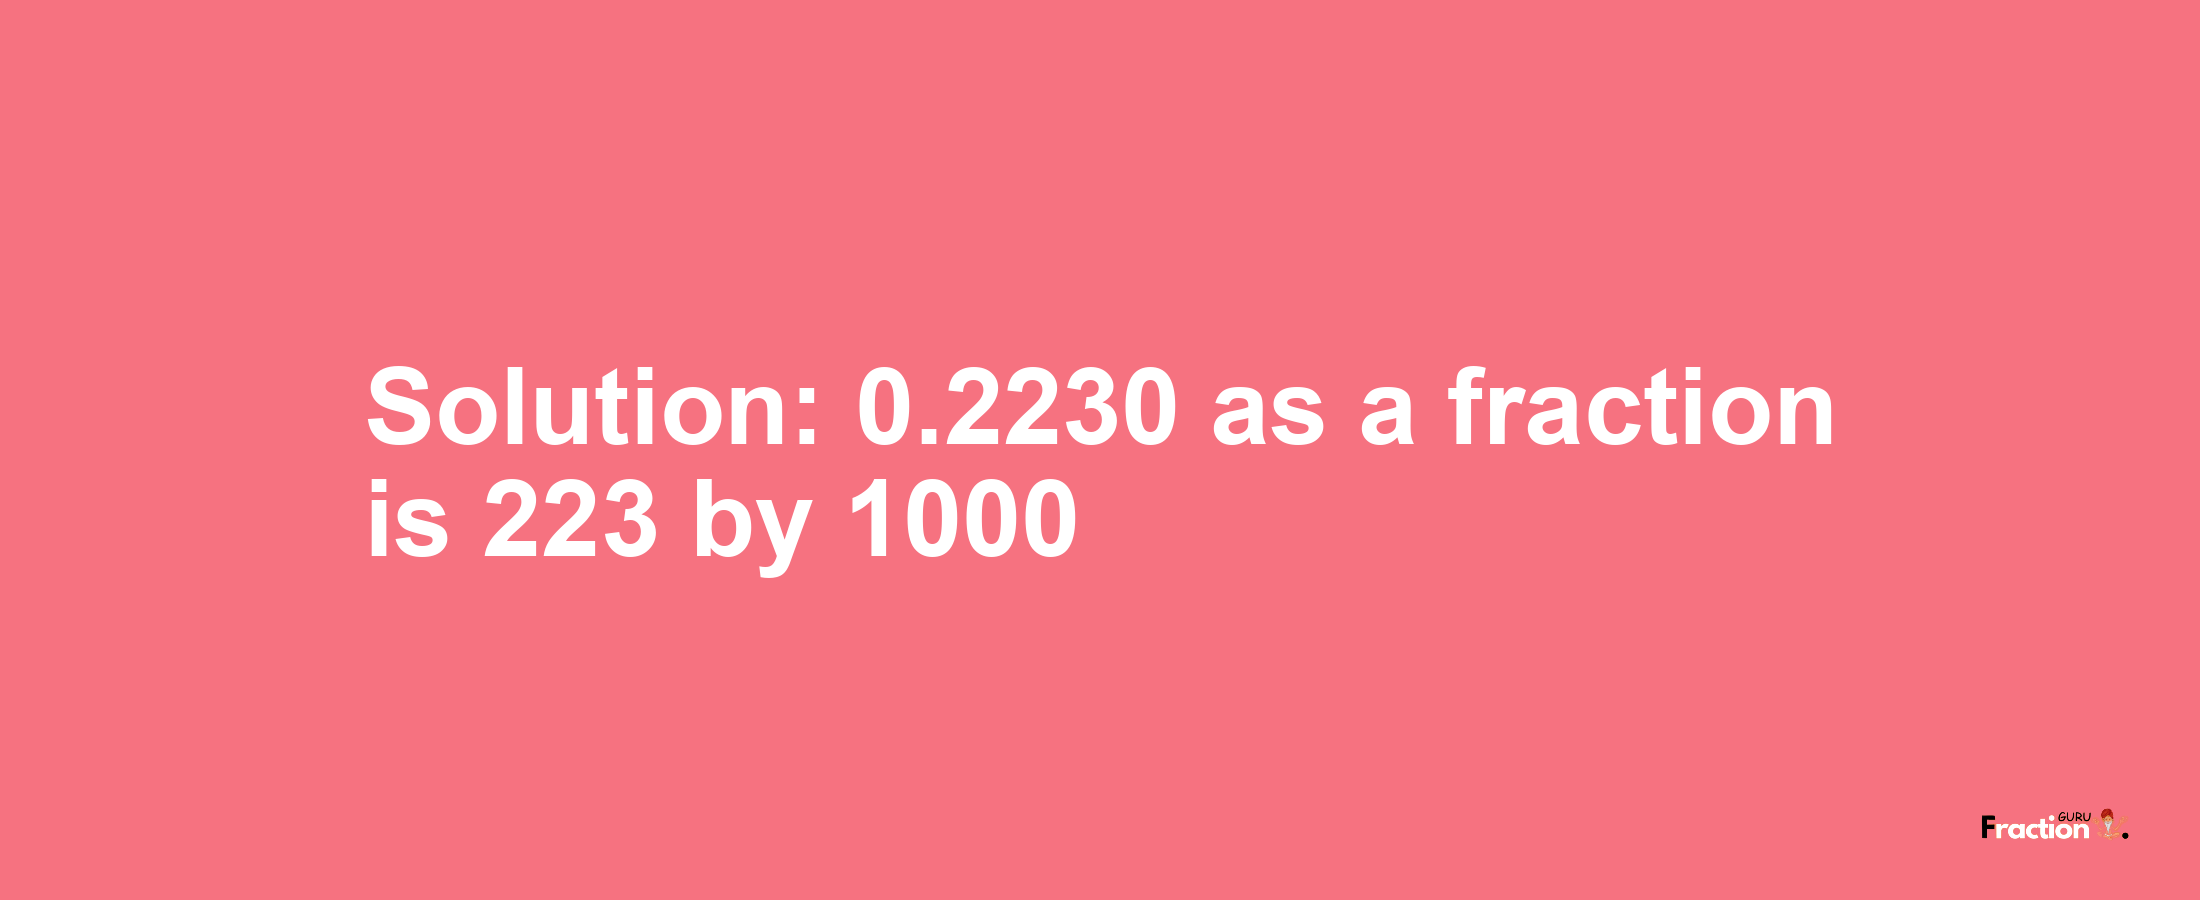 Solution:0.2230 as a fraction is 223/1000